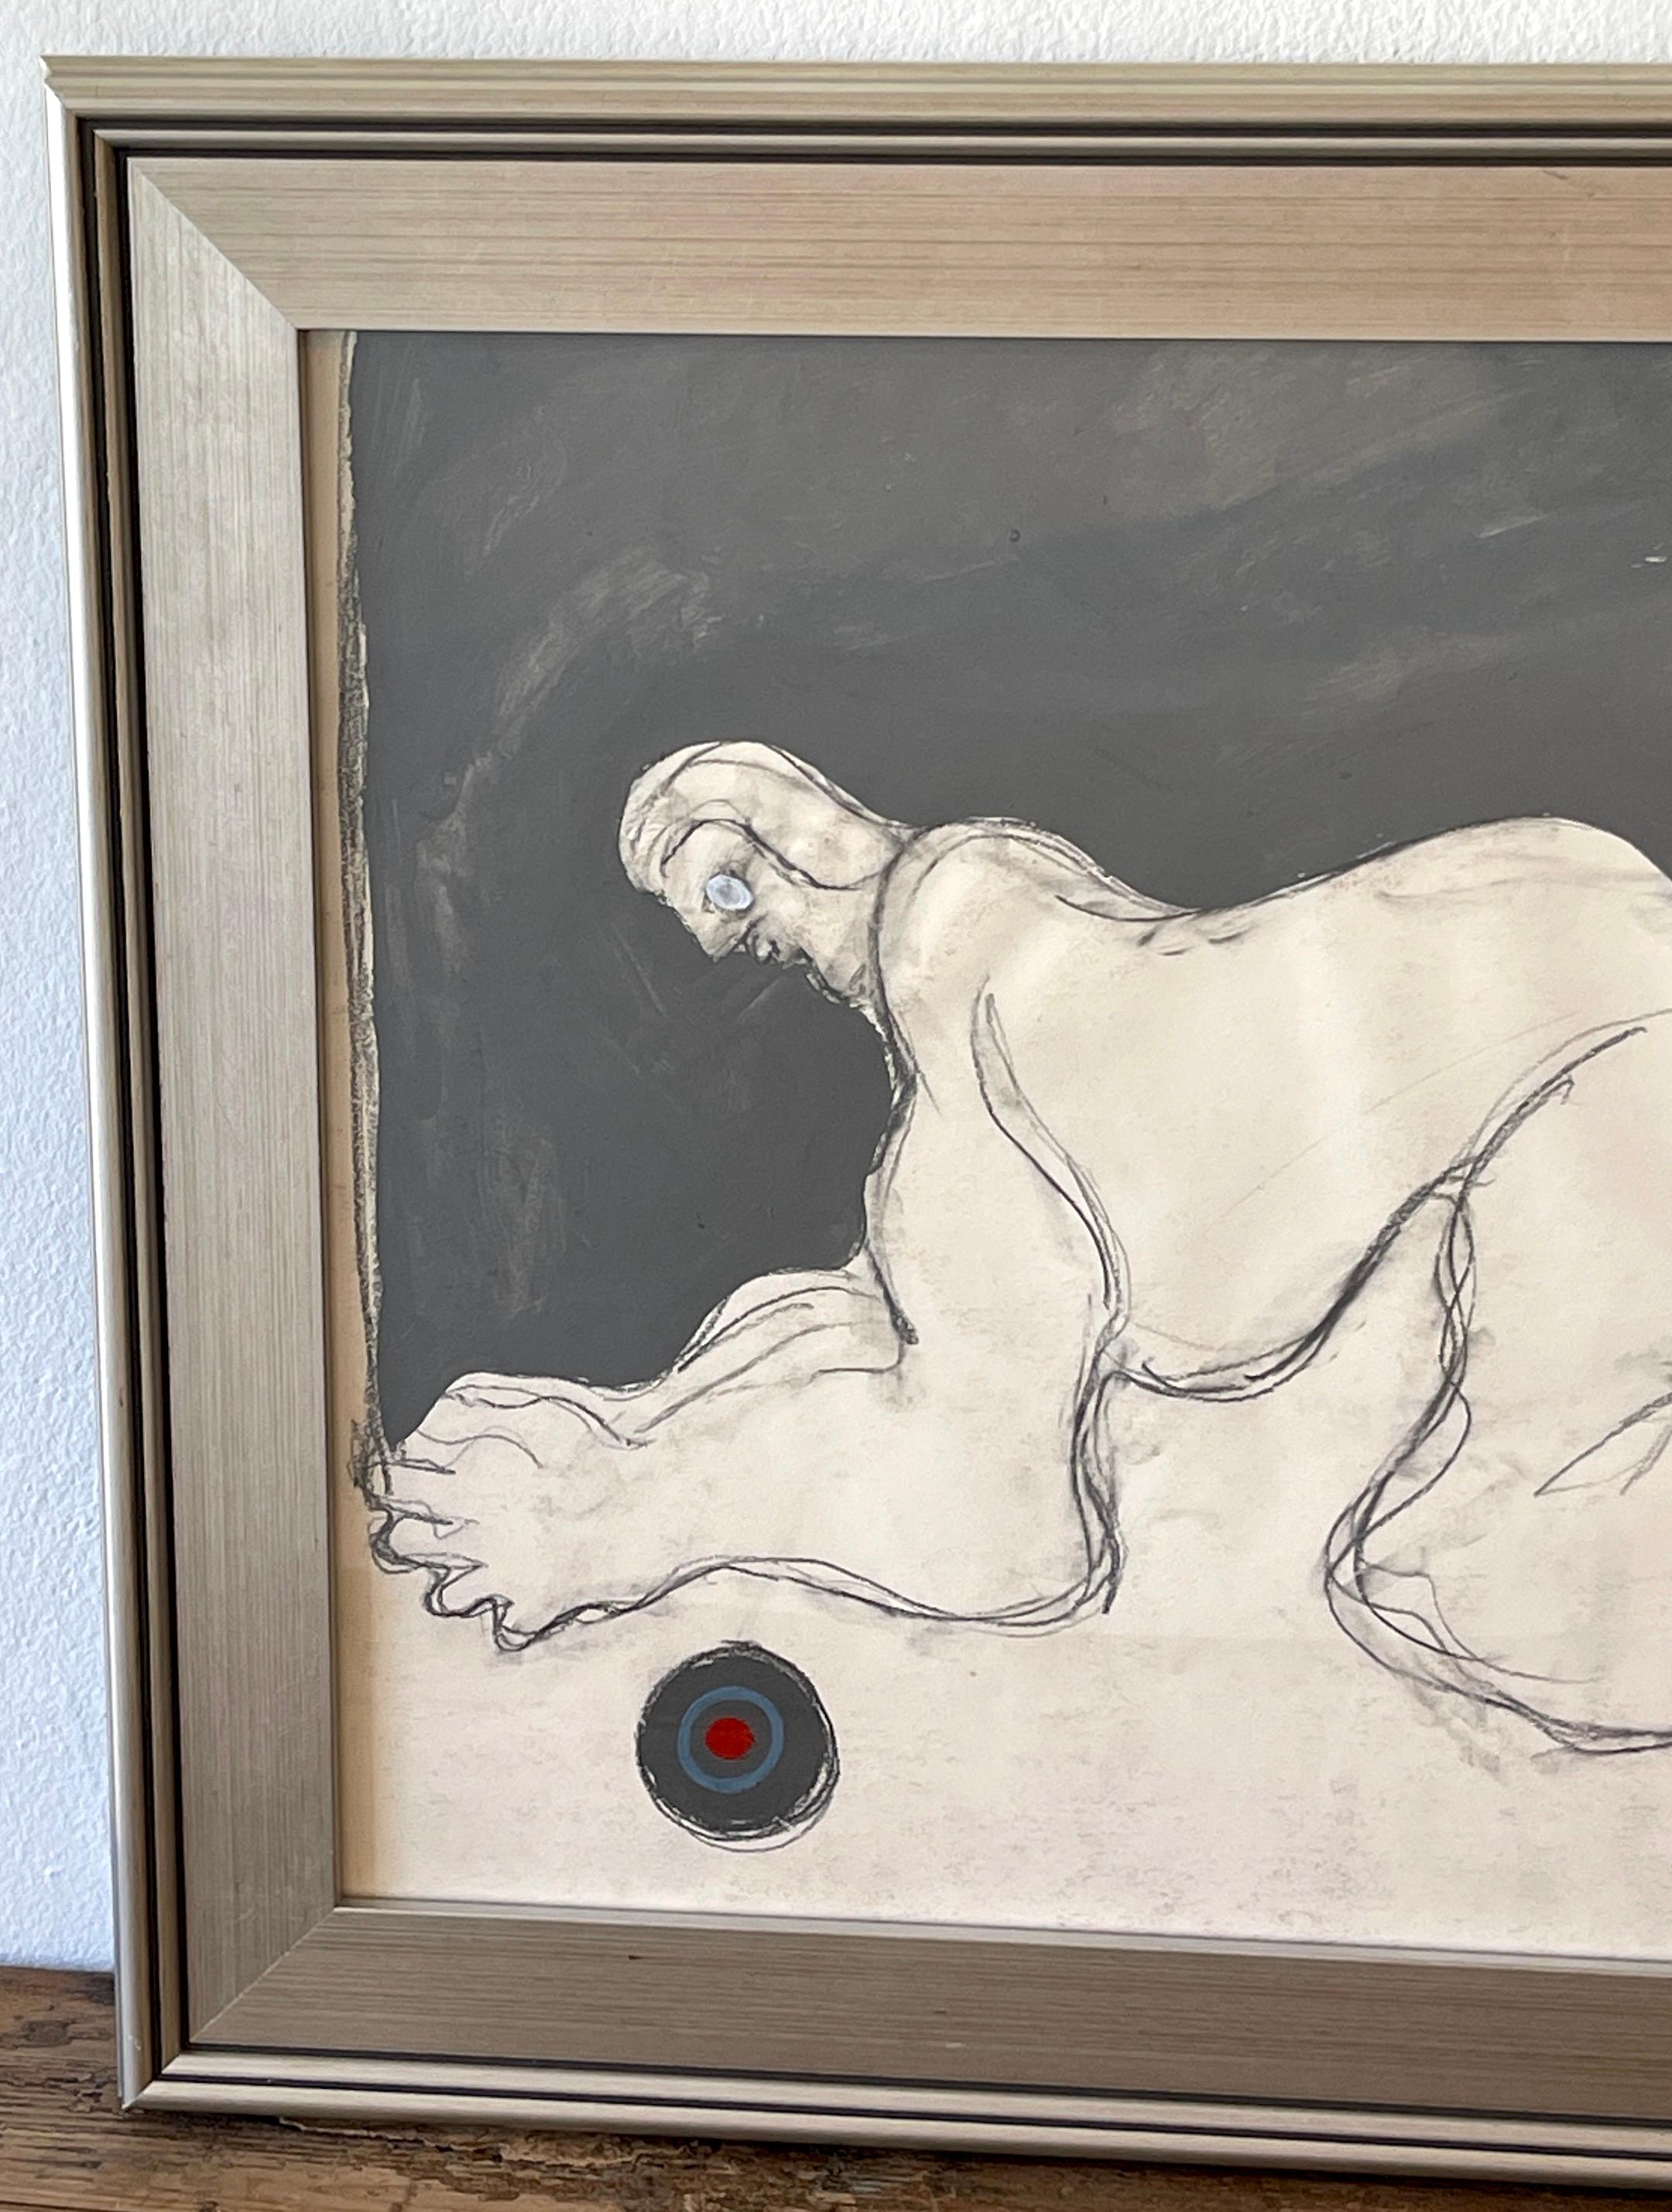 Silvered 'Crouching Figure' Oil/Mixed Media on Paper, 1960s by Douglas D. Peden  For Sale